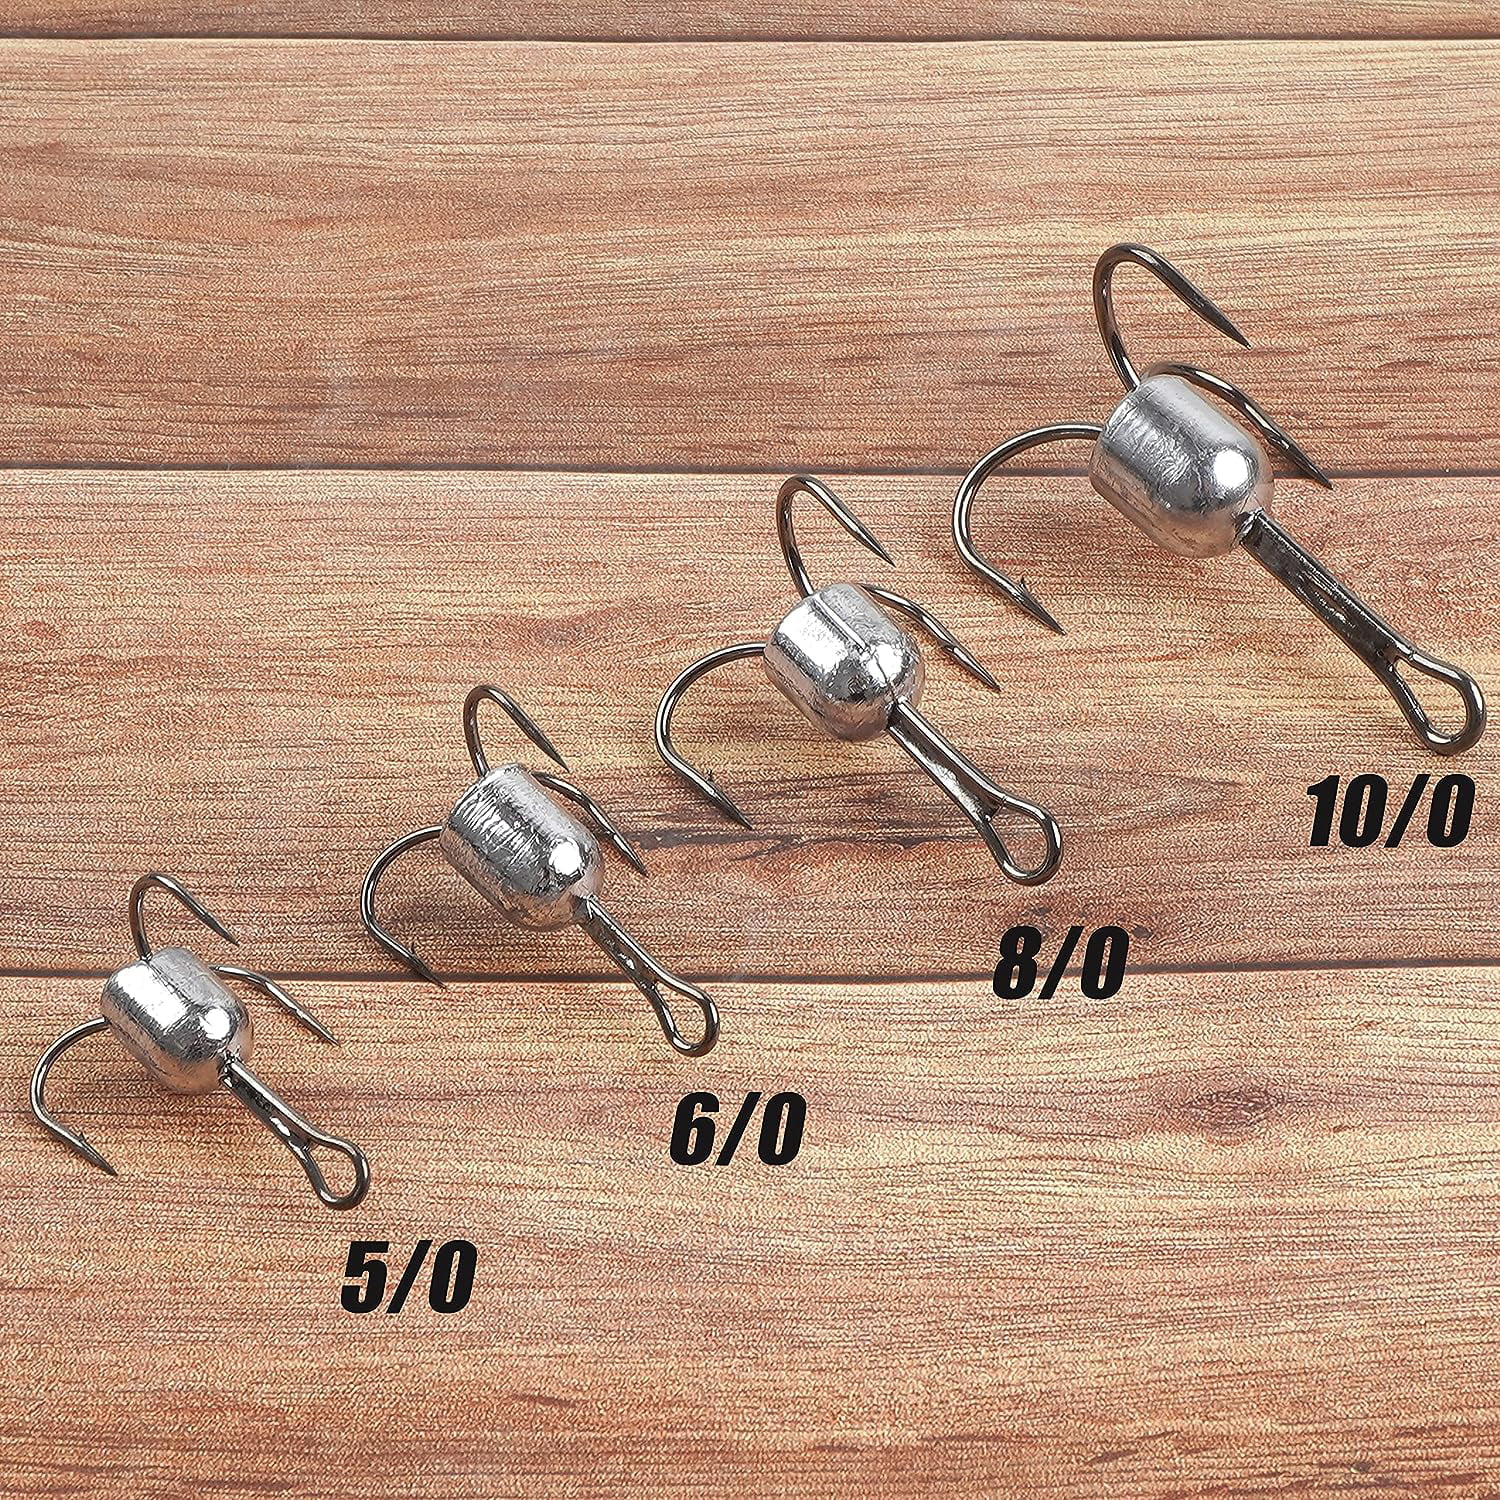 Snagging Hooks Weighted Treble Hooks,5pcs Large Weighted Treble